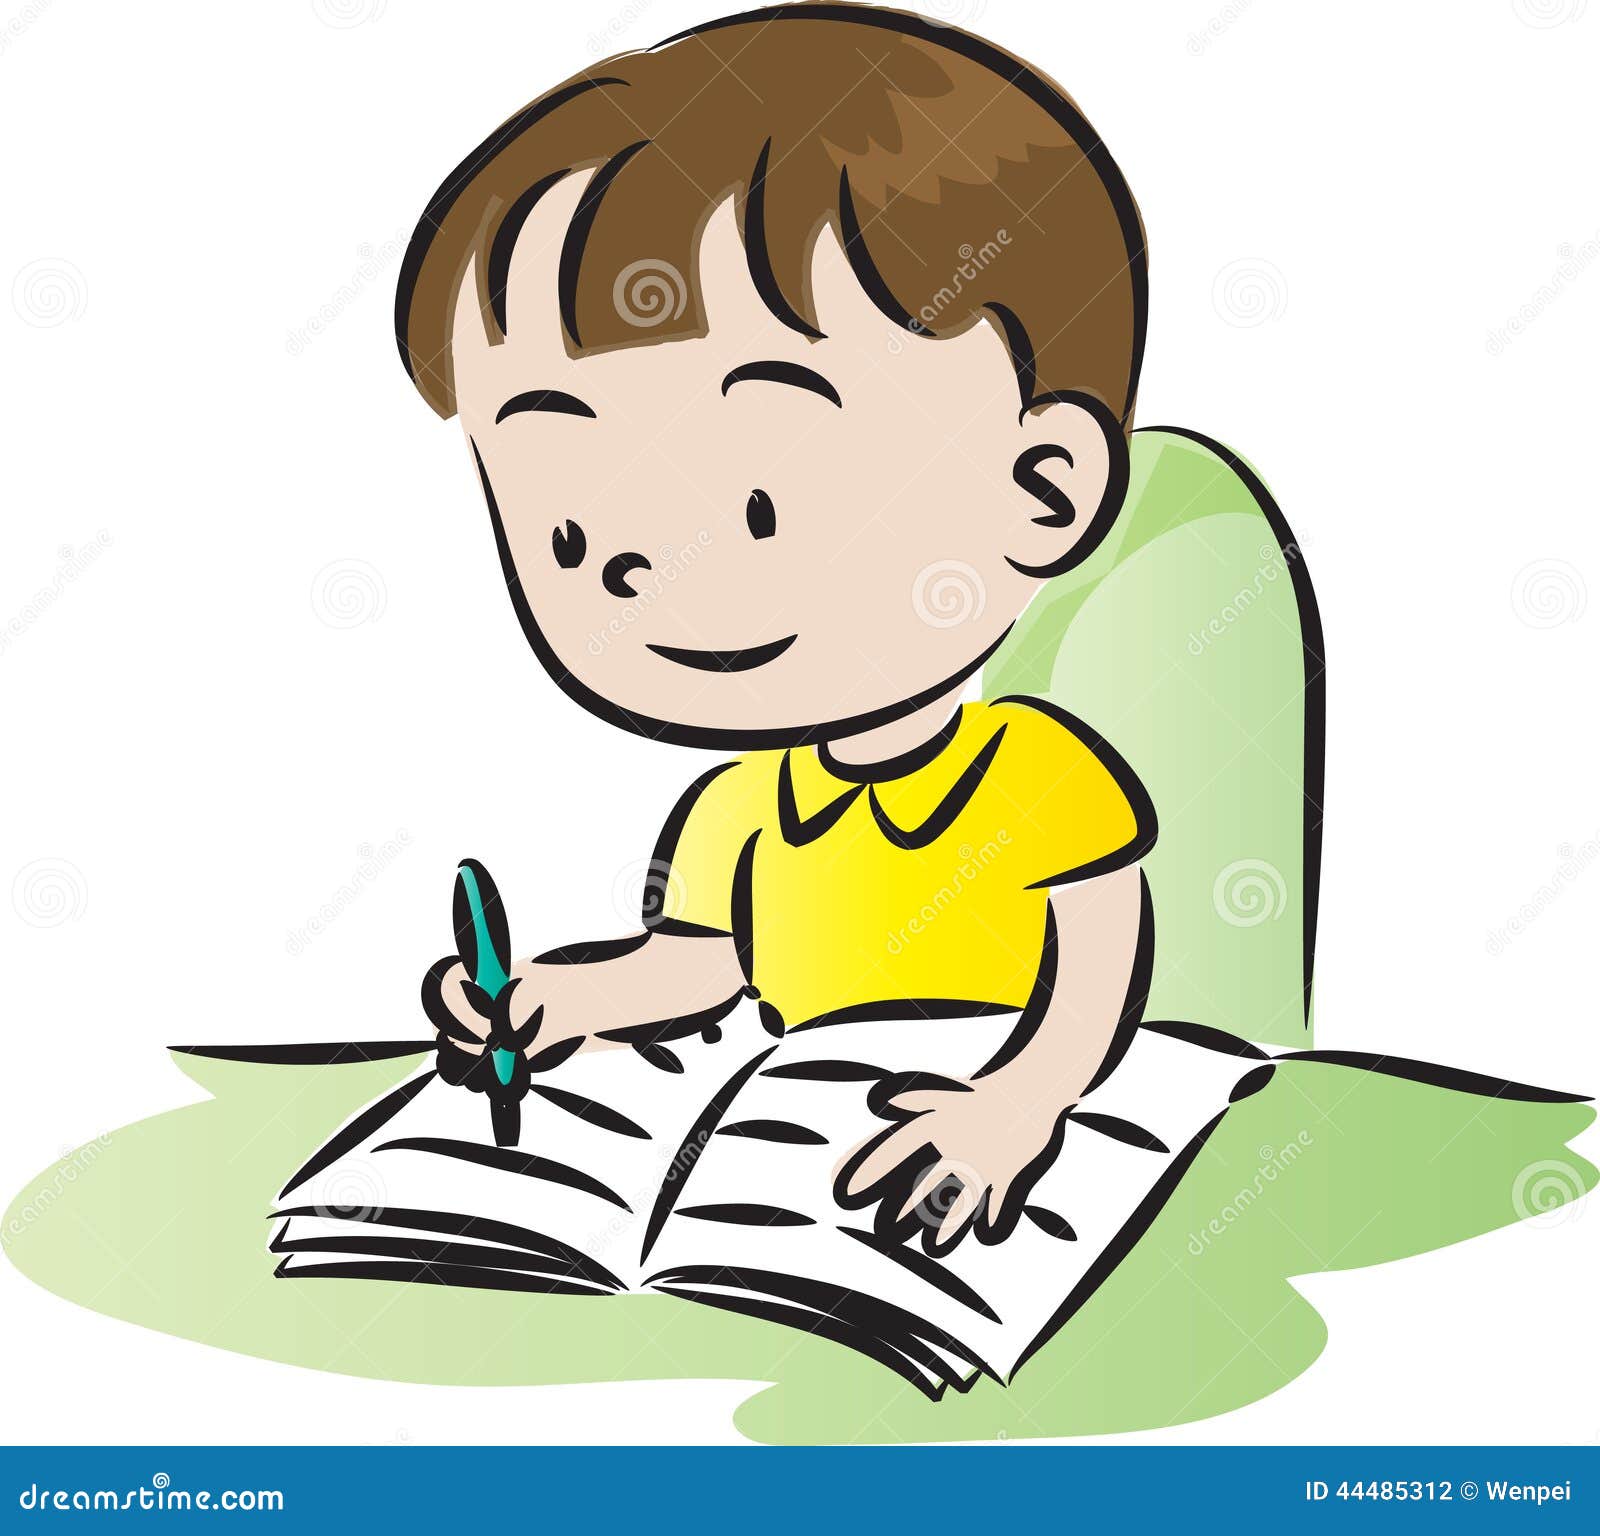 drawing of a kid doing homework